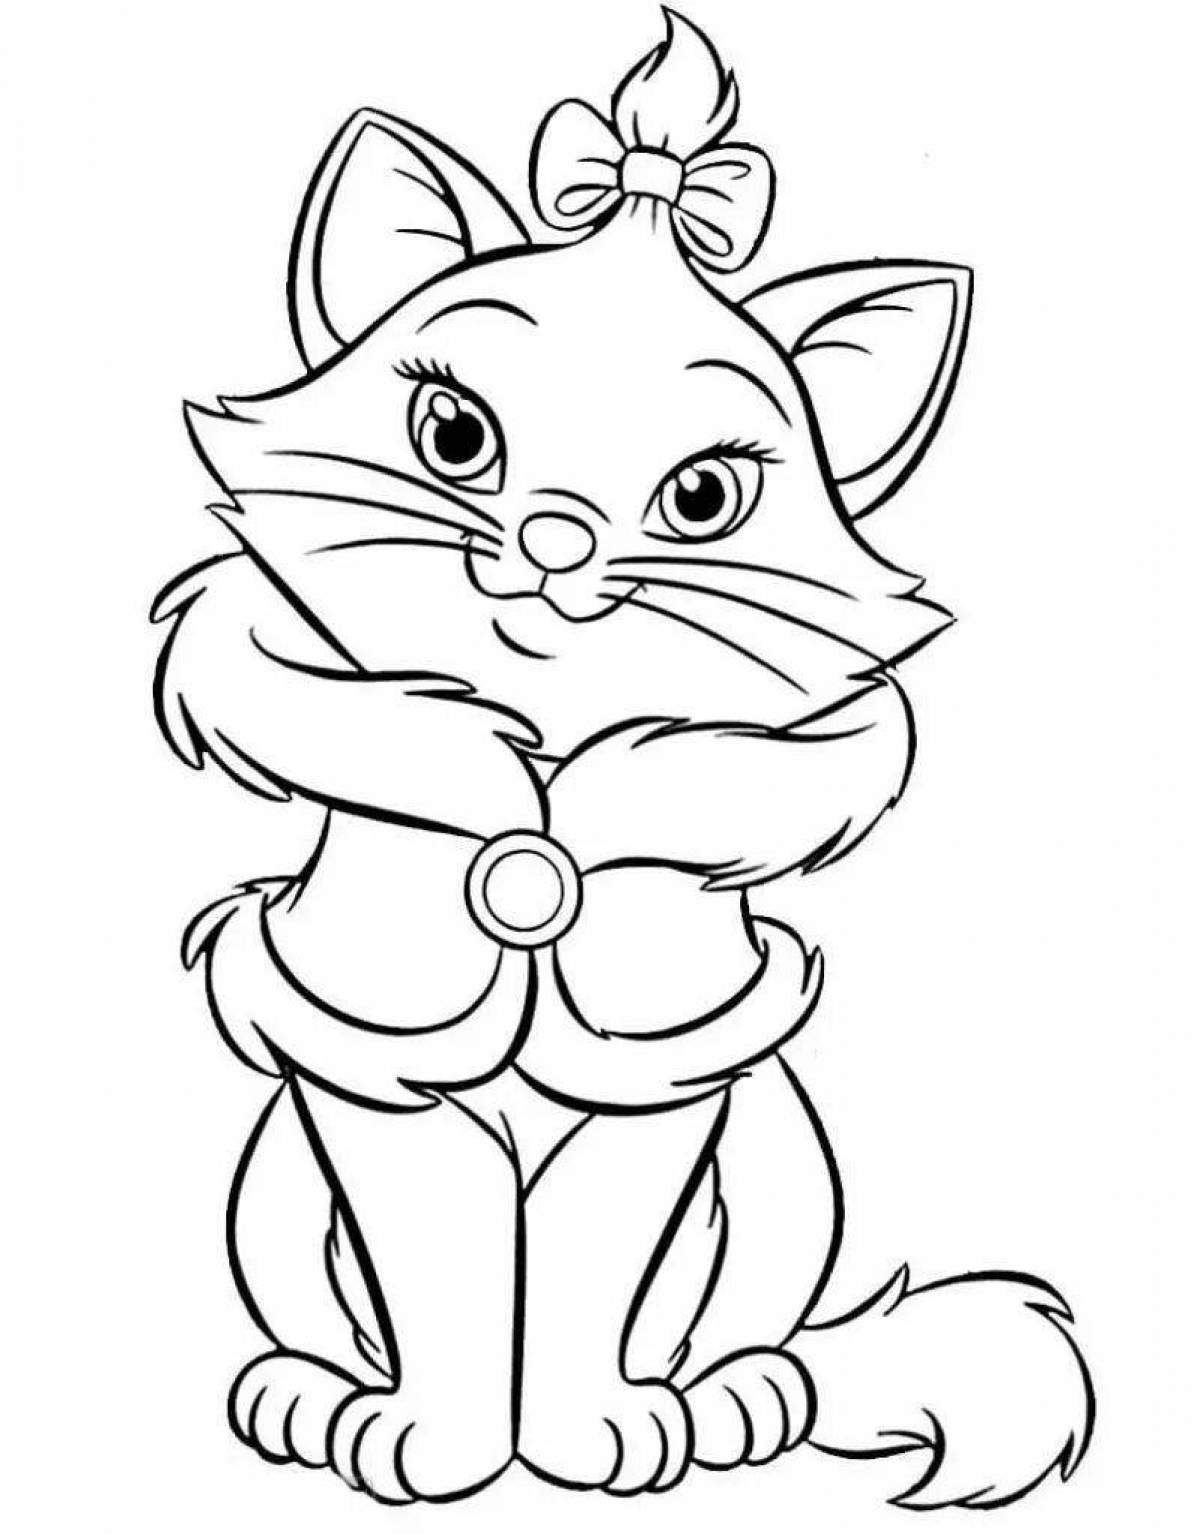 Coloring book shiny year of the cat